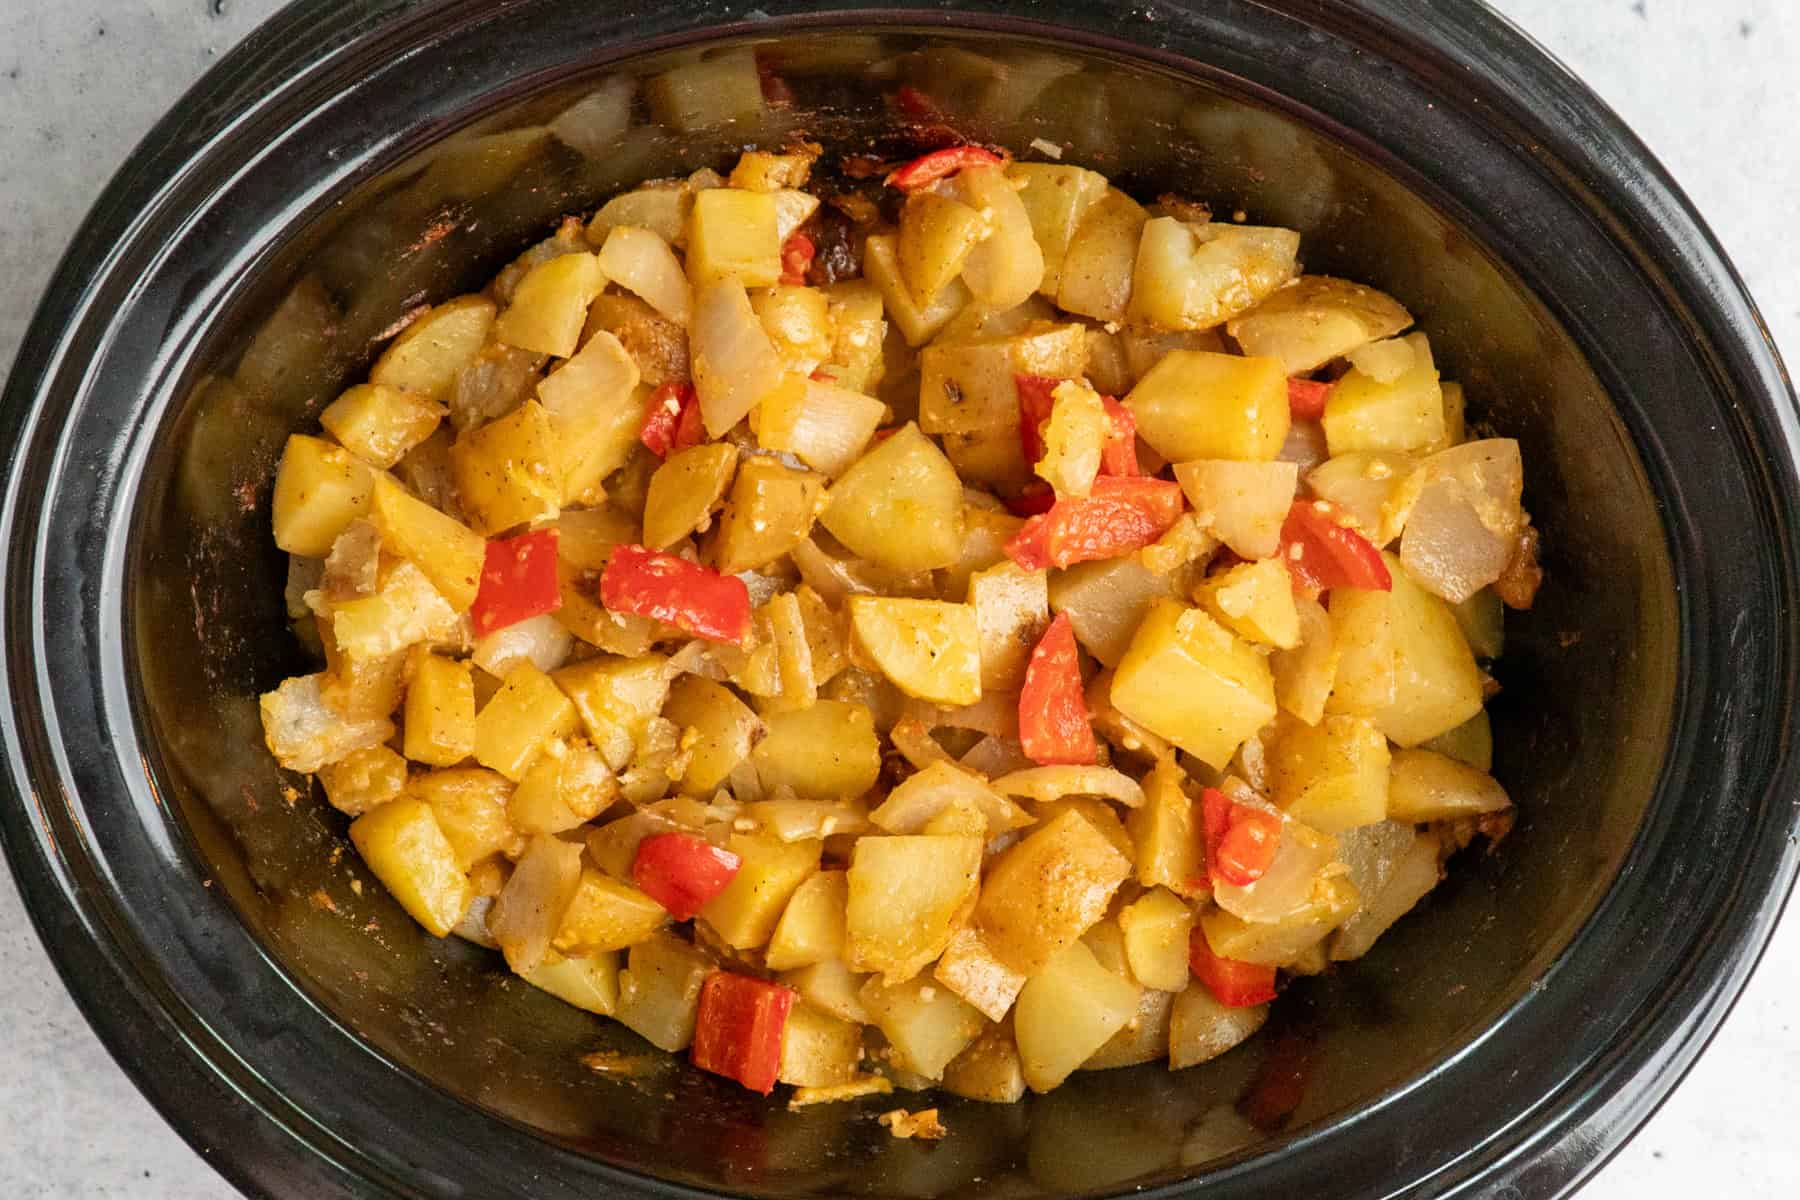 Cooked breakfast potatoes in a slow cooker.